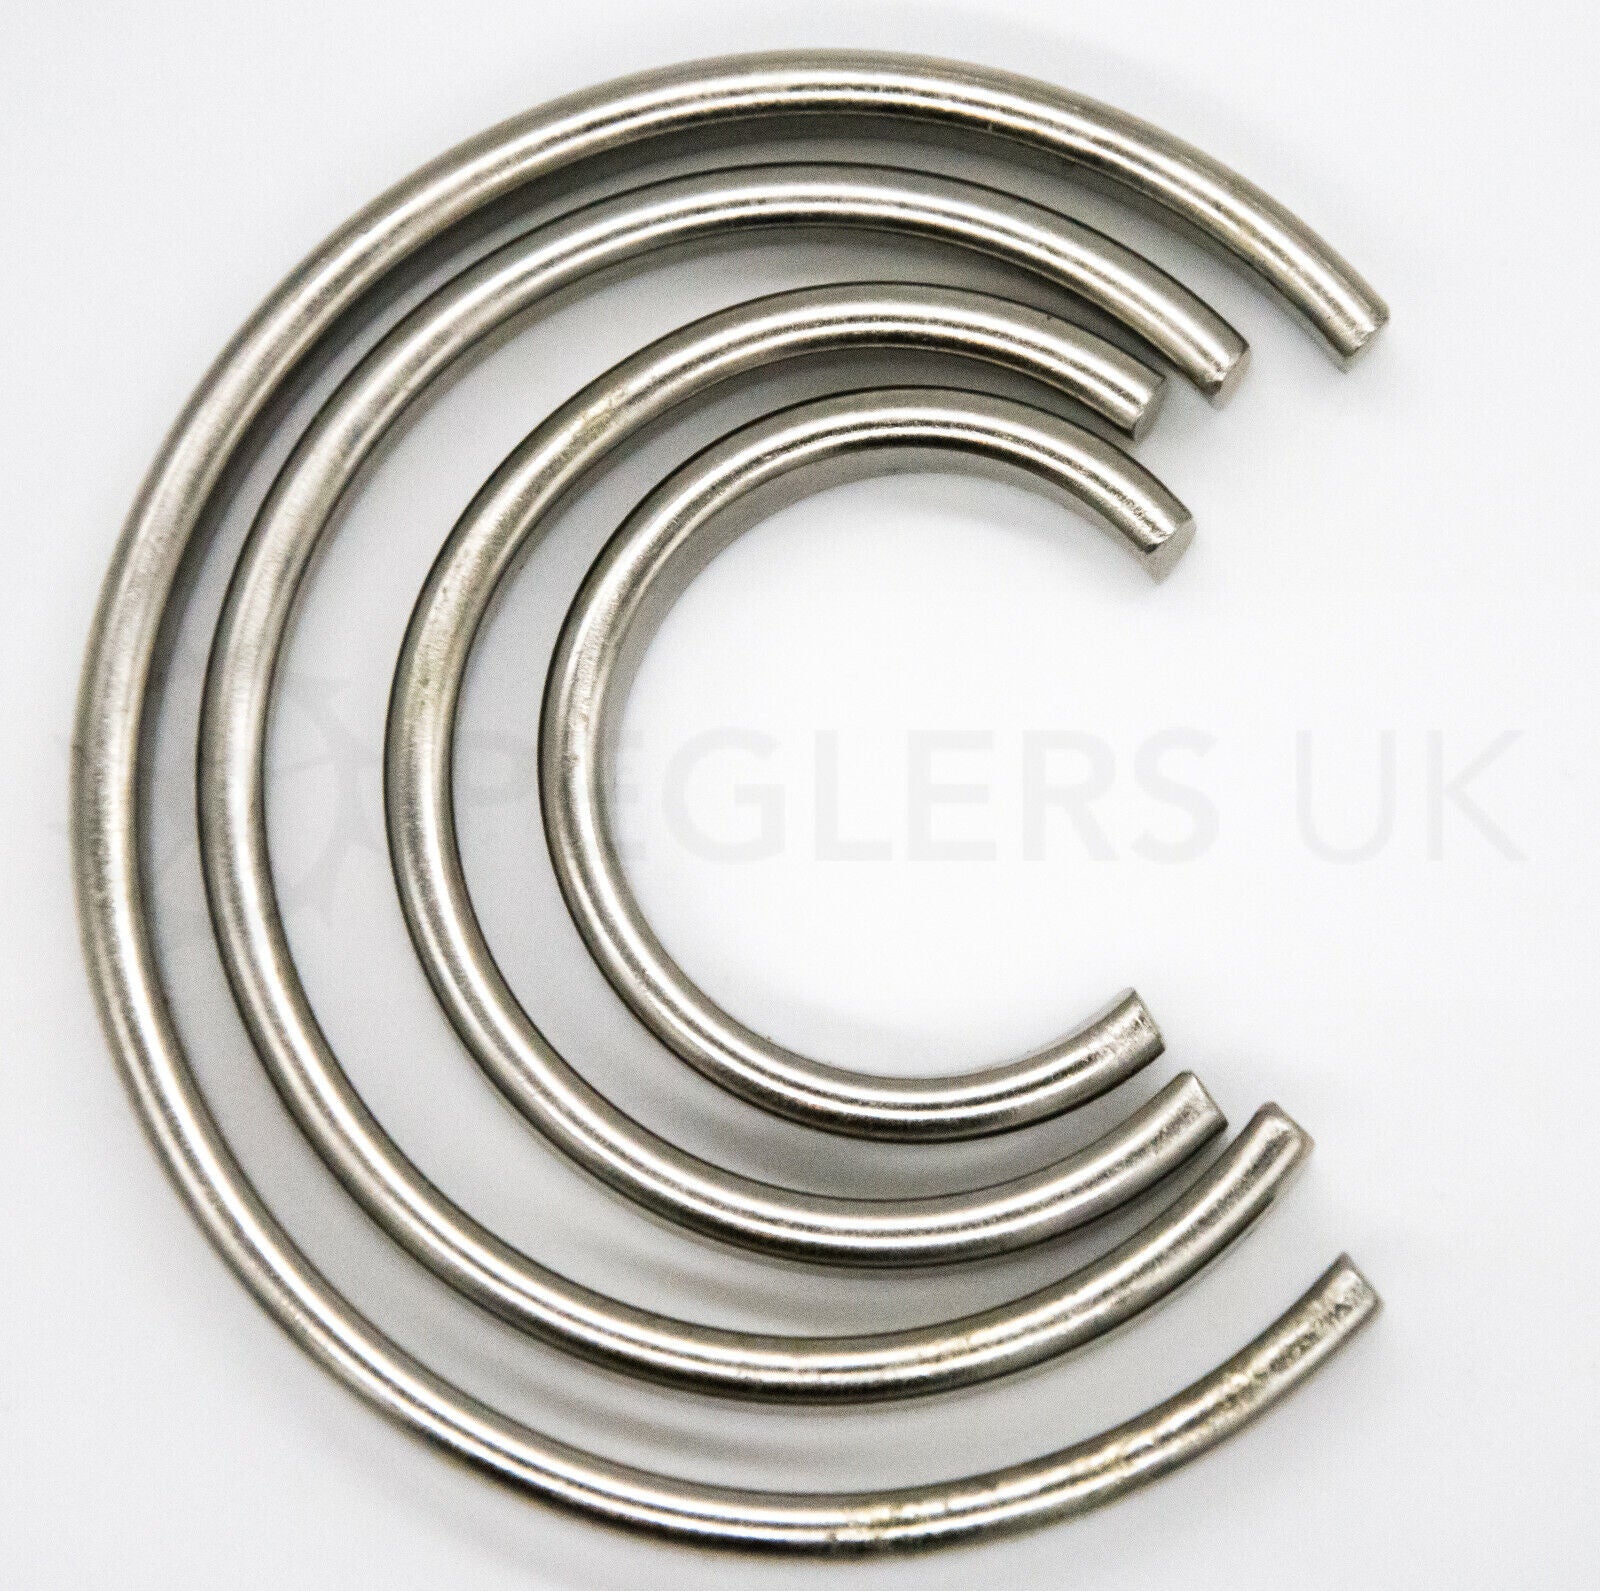 Flat C-Clamp Mainspring Holder Containment Rings